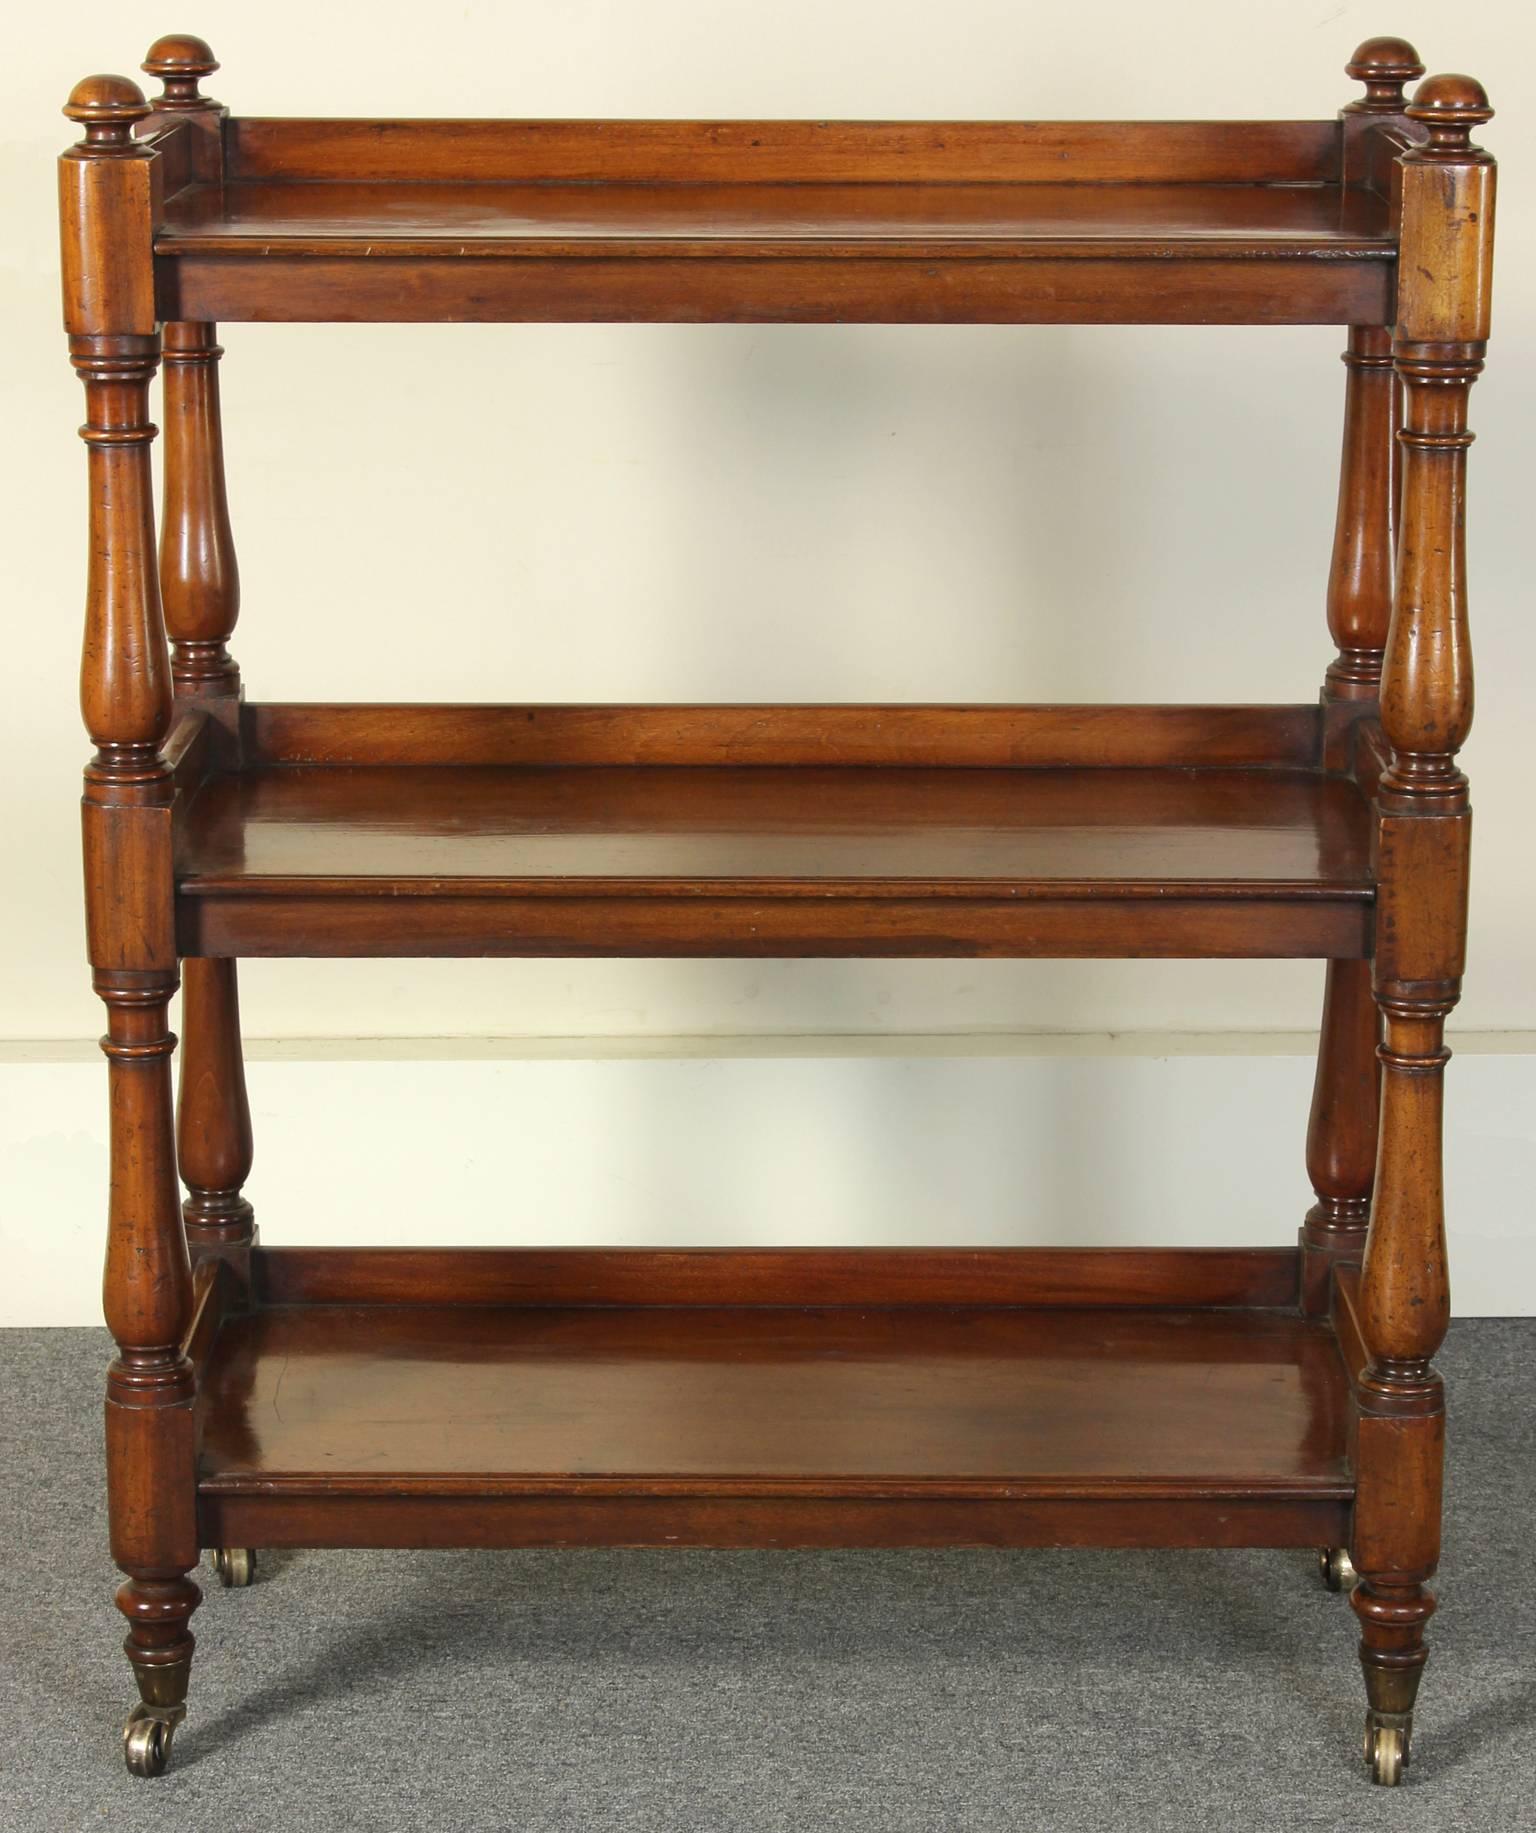 A mid 19th C. English three-shelf server or trolly in beautifully aged mahogany on turned-legs with original brass casters. 